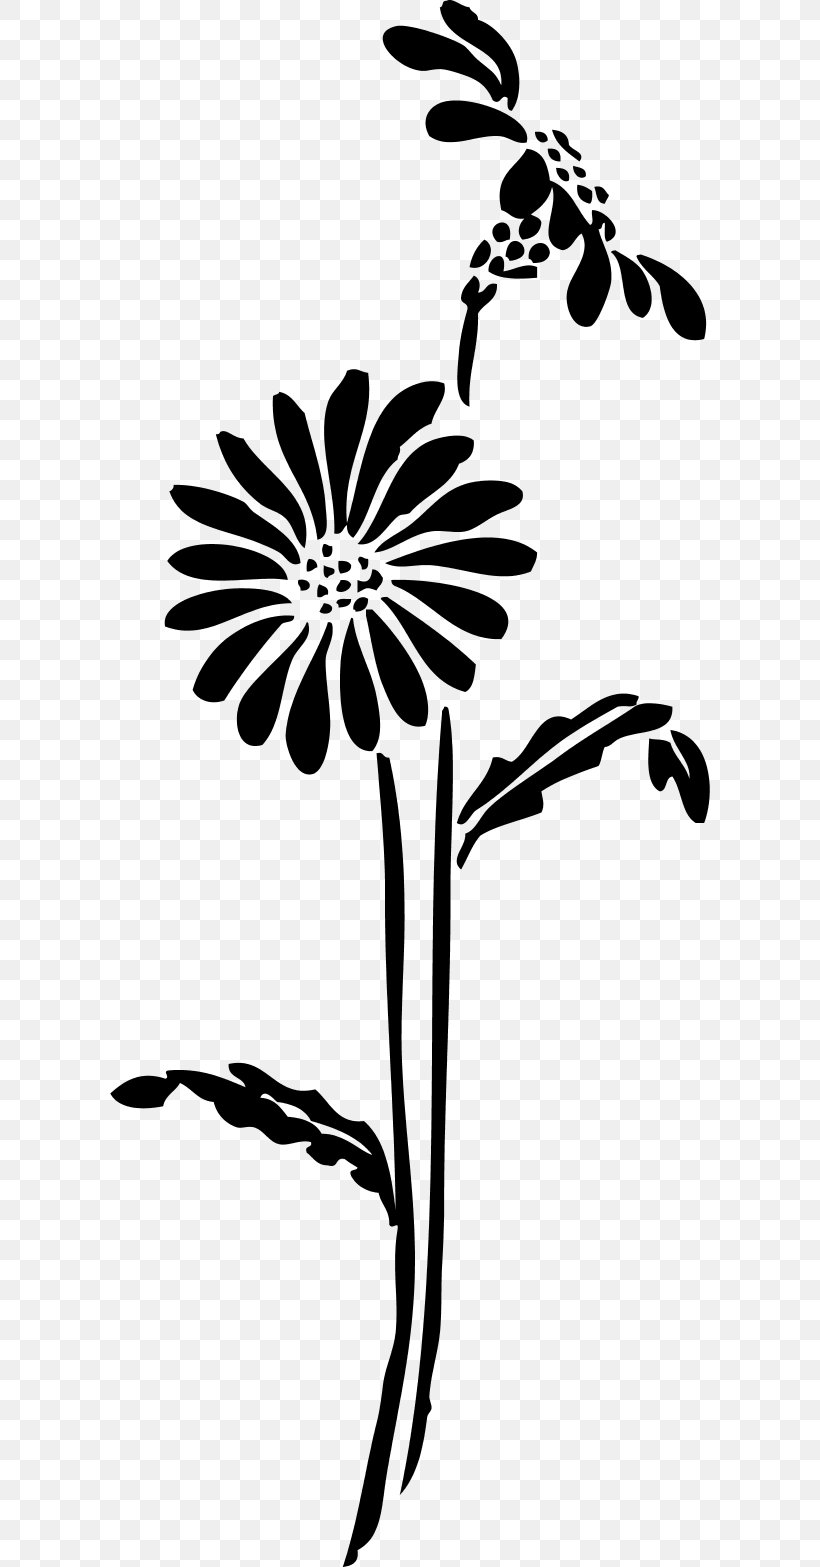 Flower Silhouette Clip Art, PNG, 600x1567px, Flower, Art, Black, Black And White, Branch Download Free